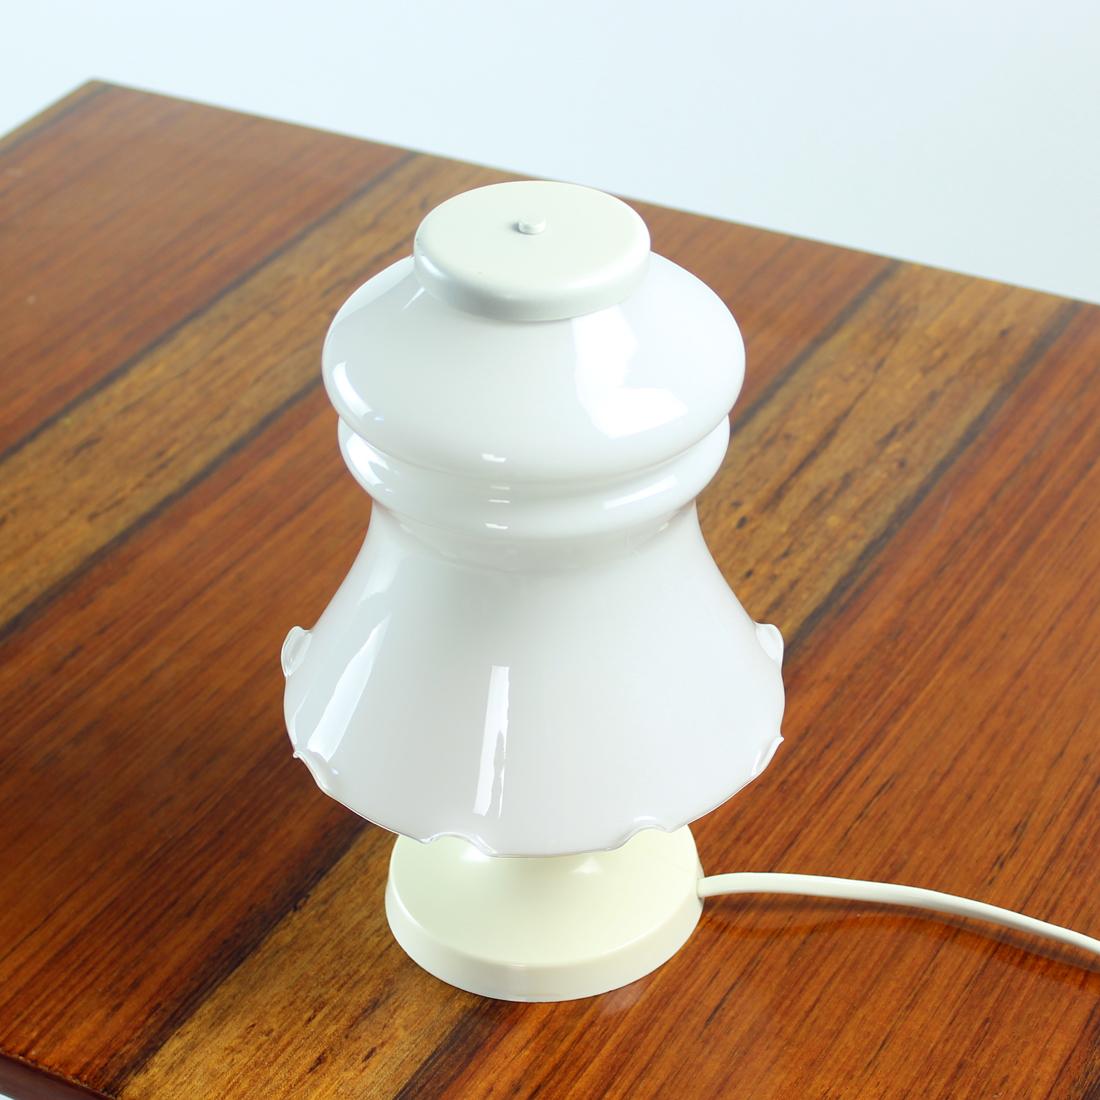 Beautiful table lamp from Mid-century era in elegant design. Produced by OPP Jihalava in 1960s. The lamp is made of two basic components, off-white bakelite base and opaline glass white shade. The shade is in perfect condition in pure white color.